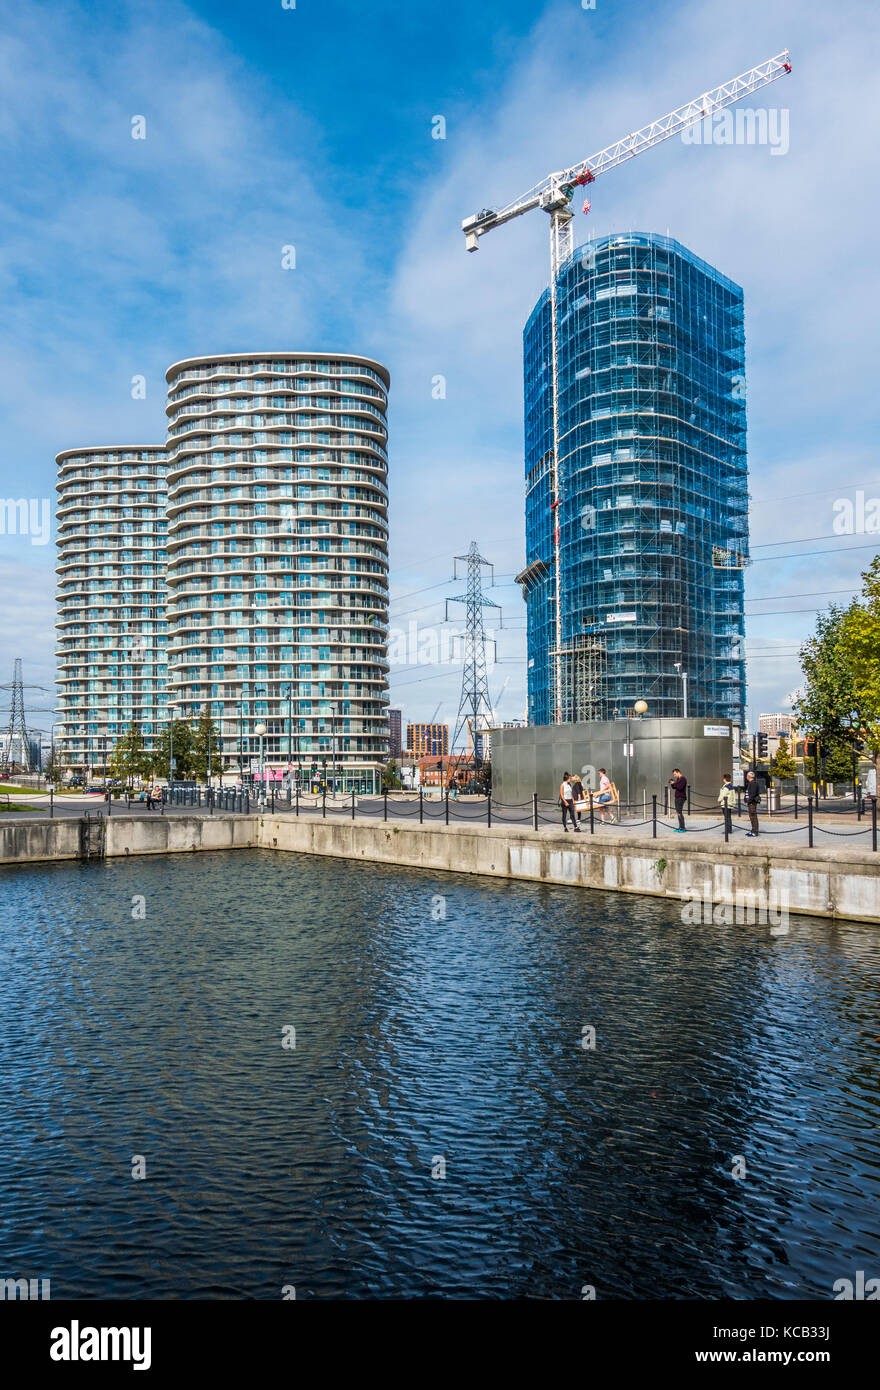 Pump Tower, a new build apartment block, undergoing construction in Royal Victoria Dock, near two other completed blocks, in London E16, England, UK. Stock Photo